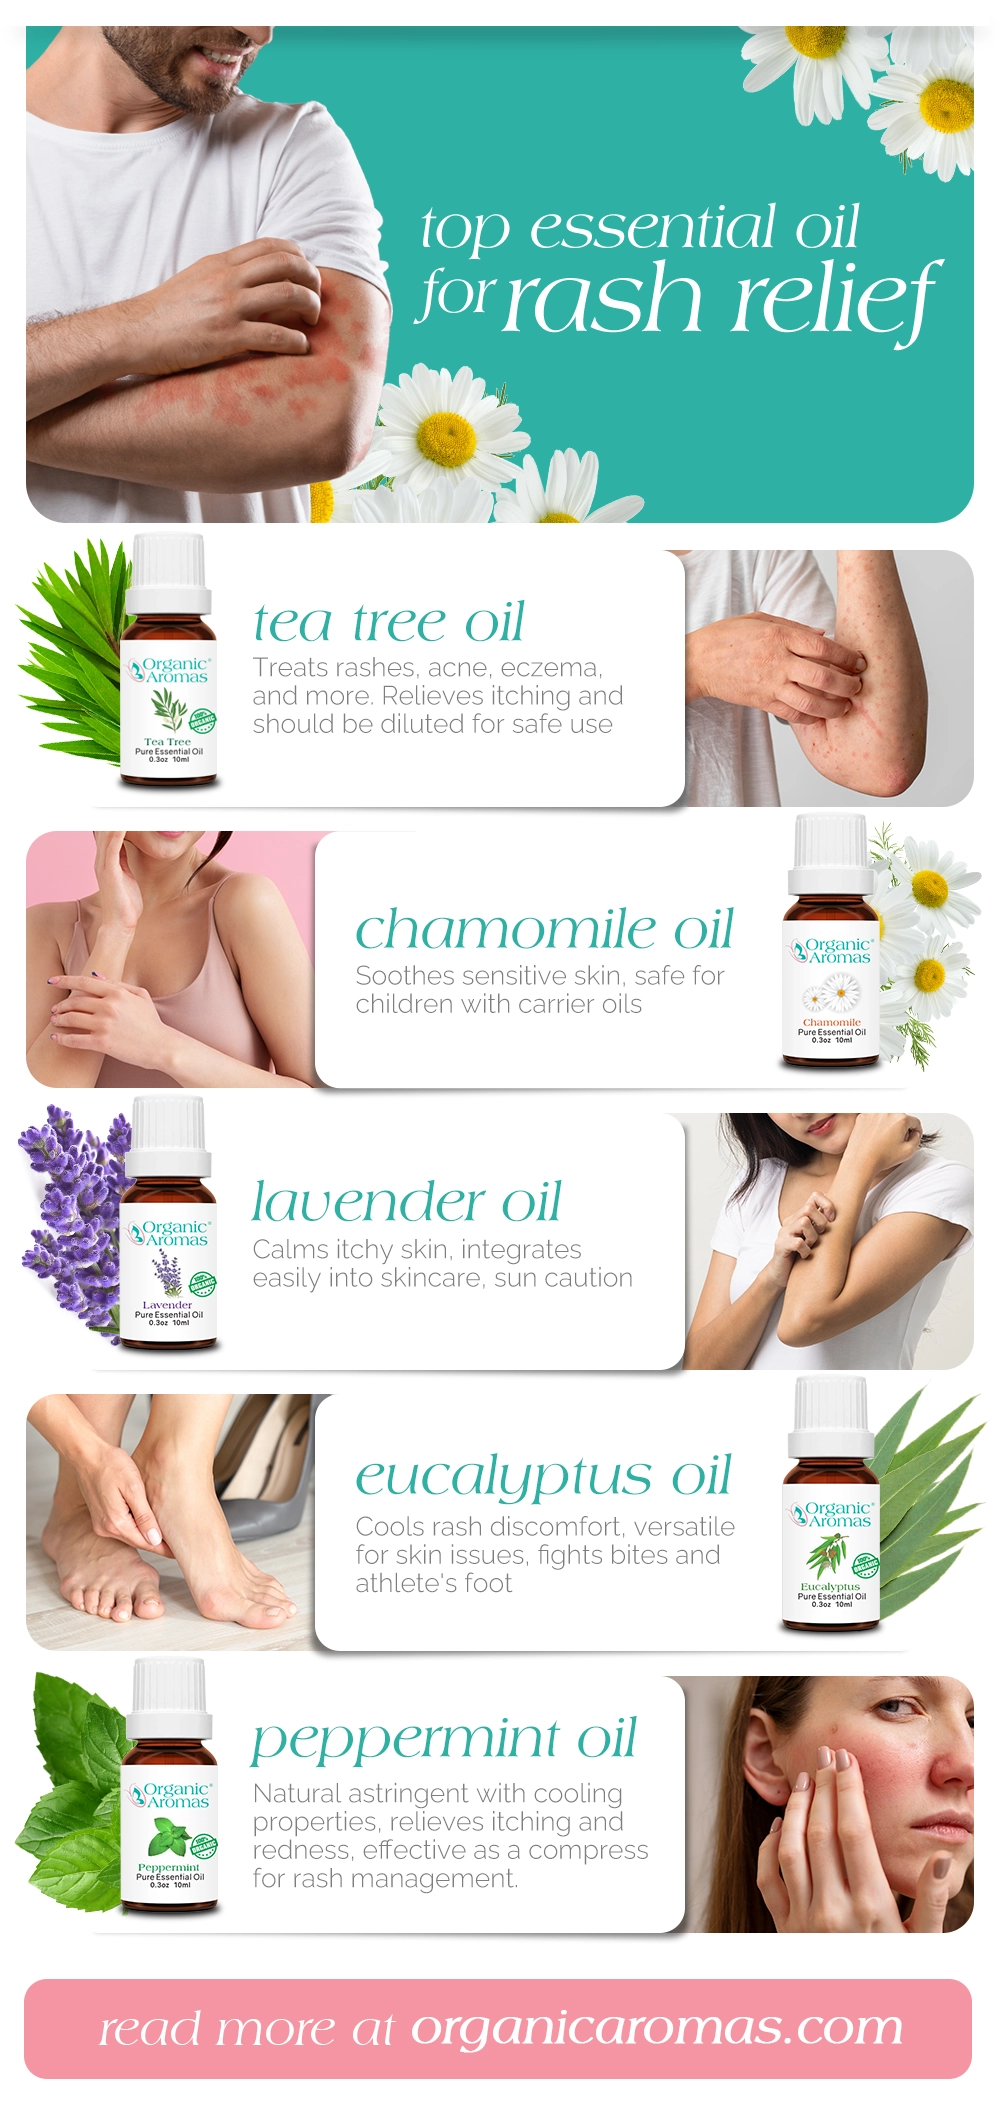 Top Essential Oils for Rash Relief Infographic by organic Aromas